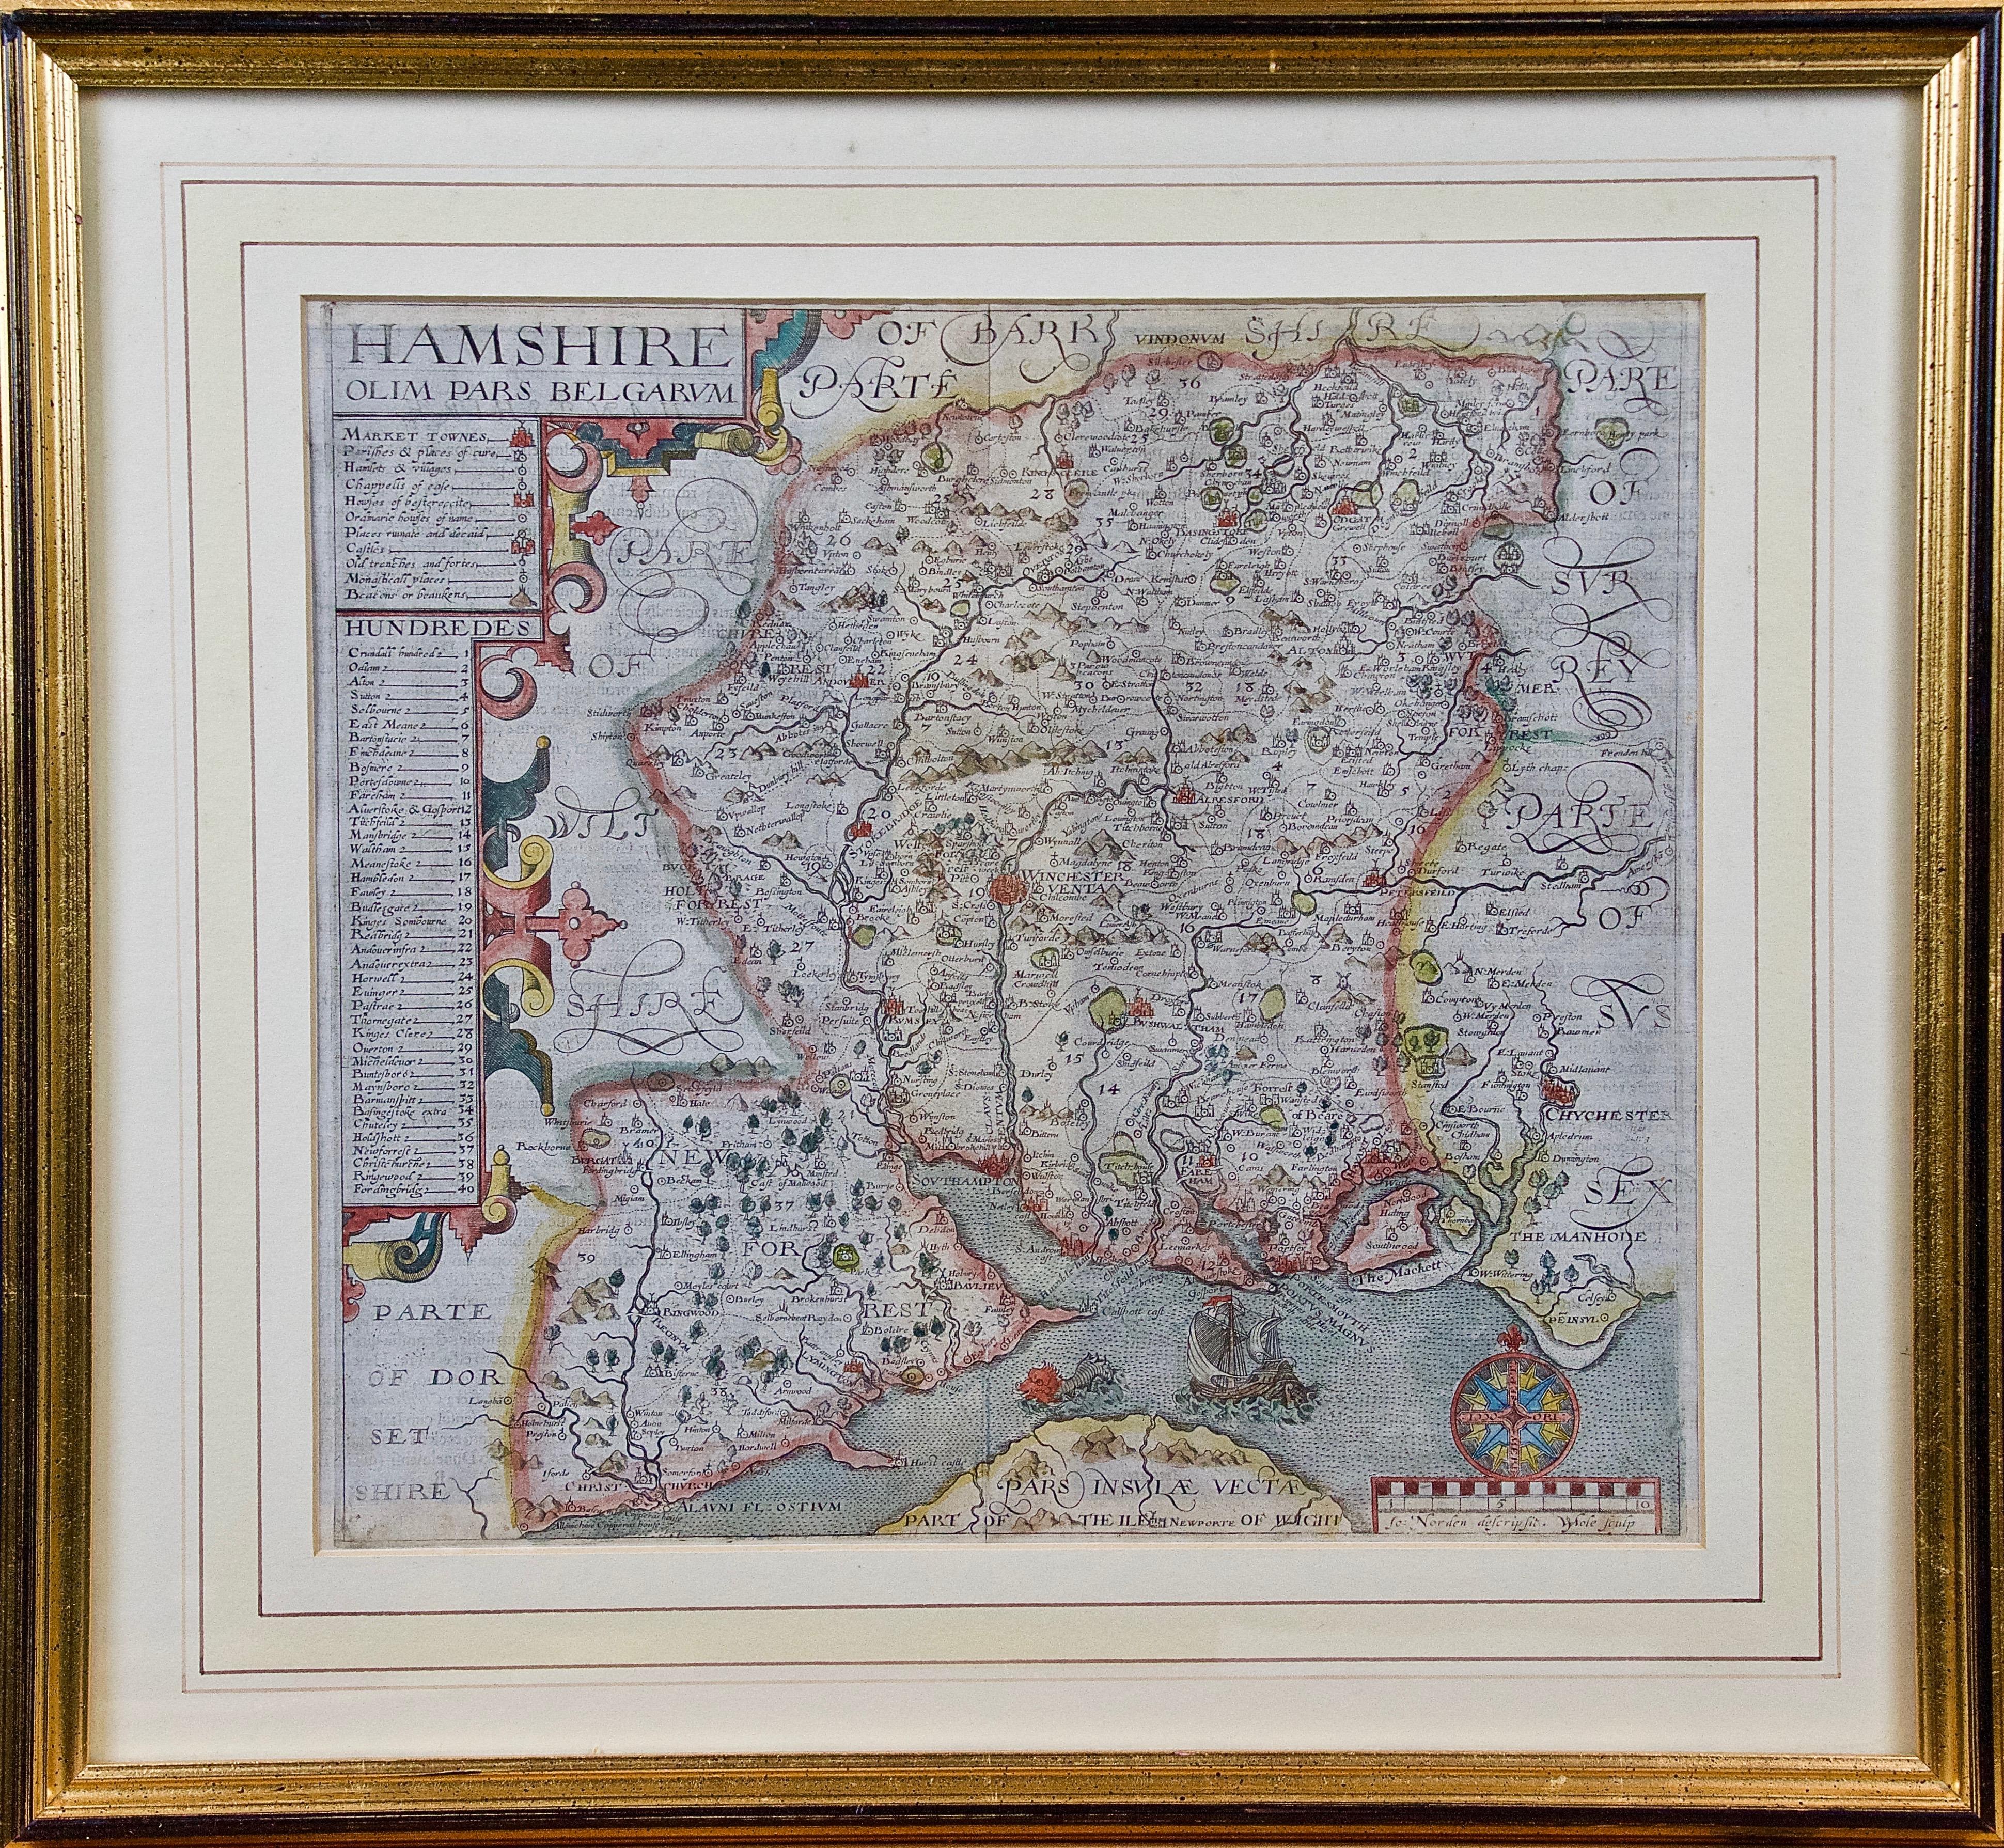 Map of Hampshire County, Britain/England, from Camden's" Britannia" in 1607  - Print by John Norden